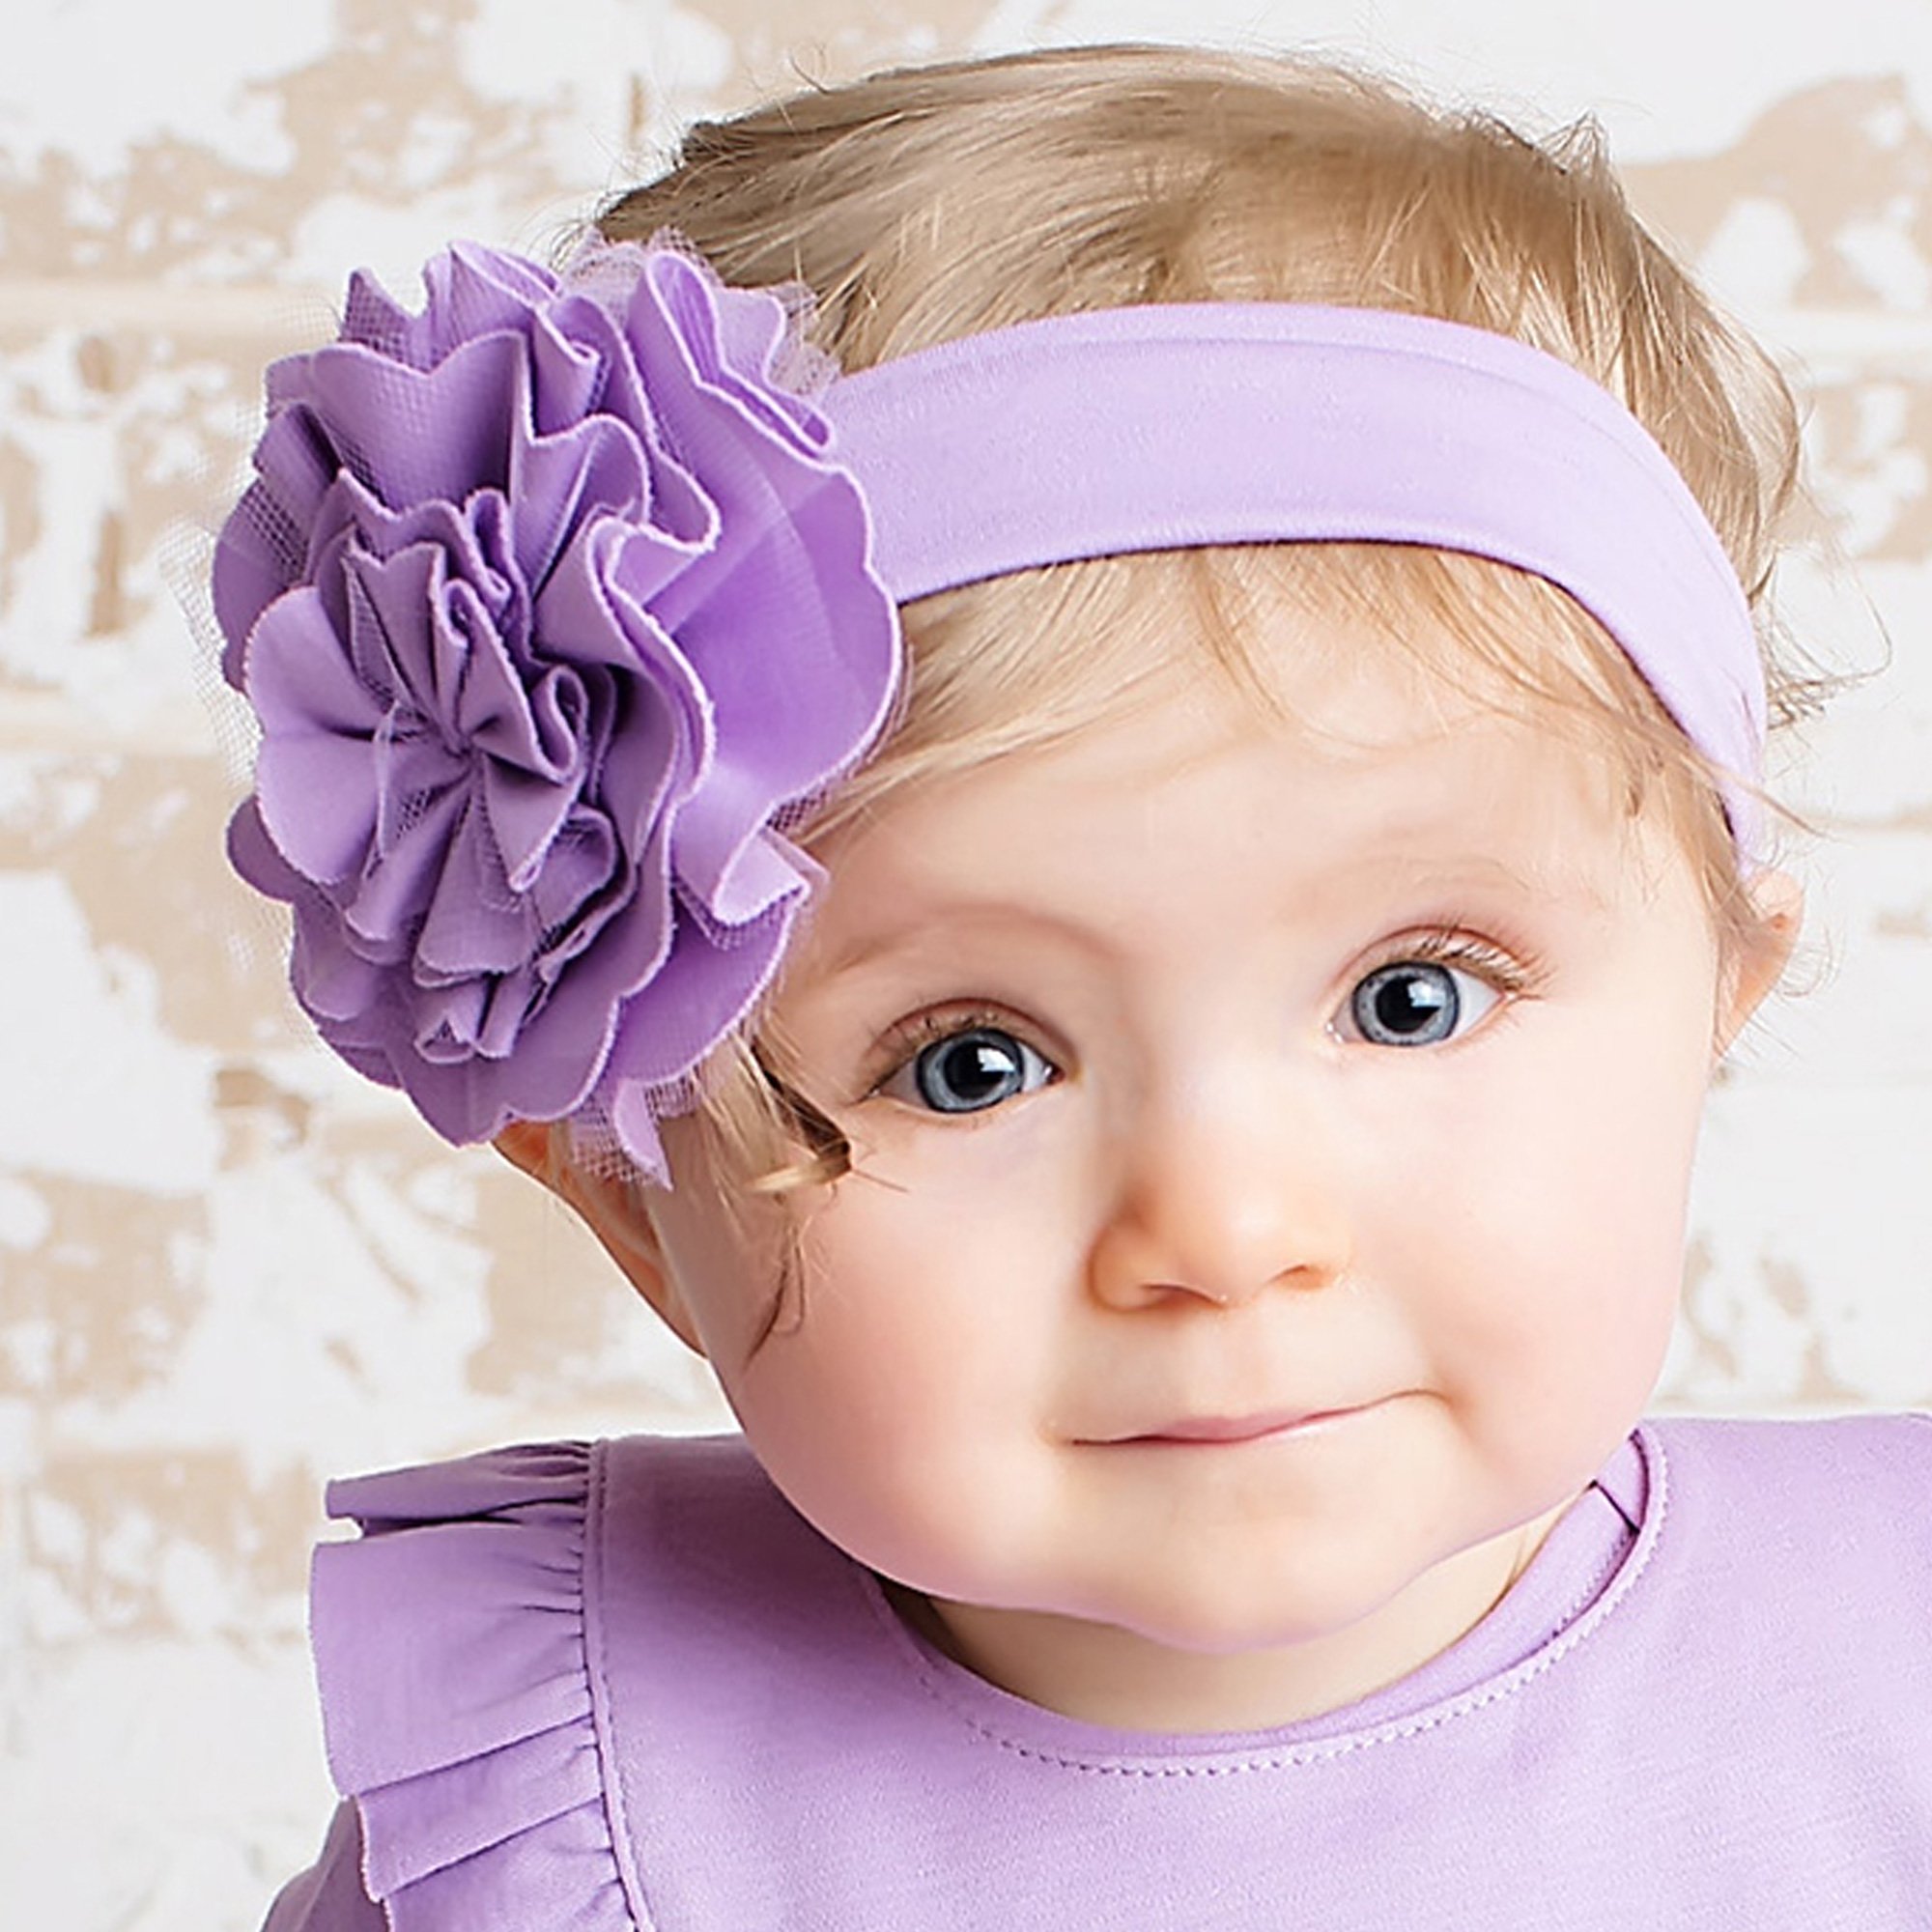 Lemon Loves Layette Lily Pad Headband for Baby Girls in Lilac